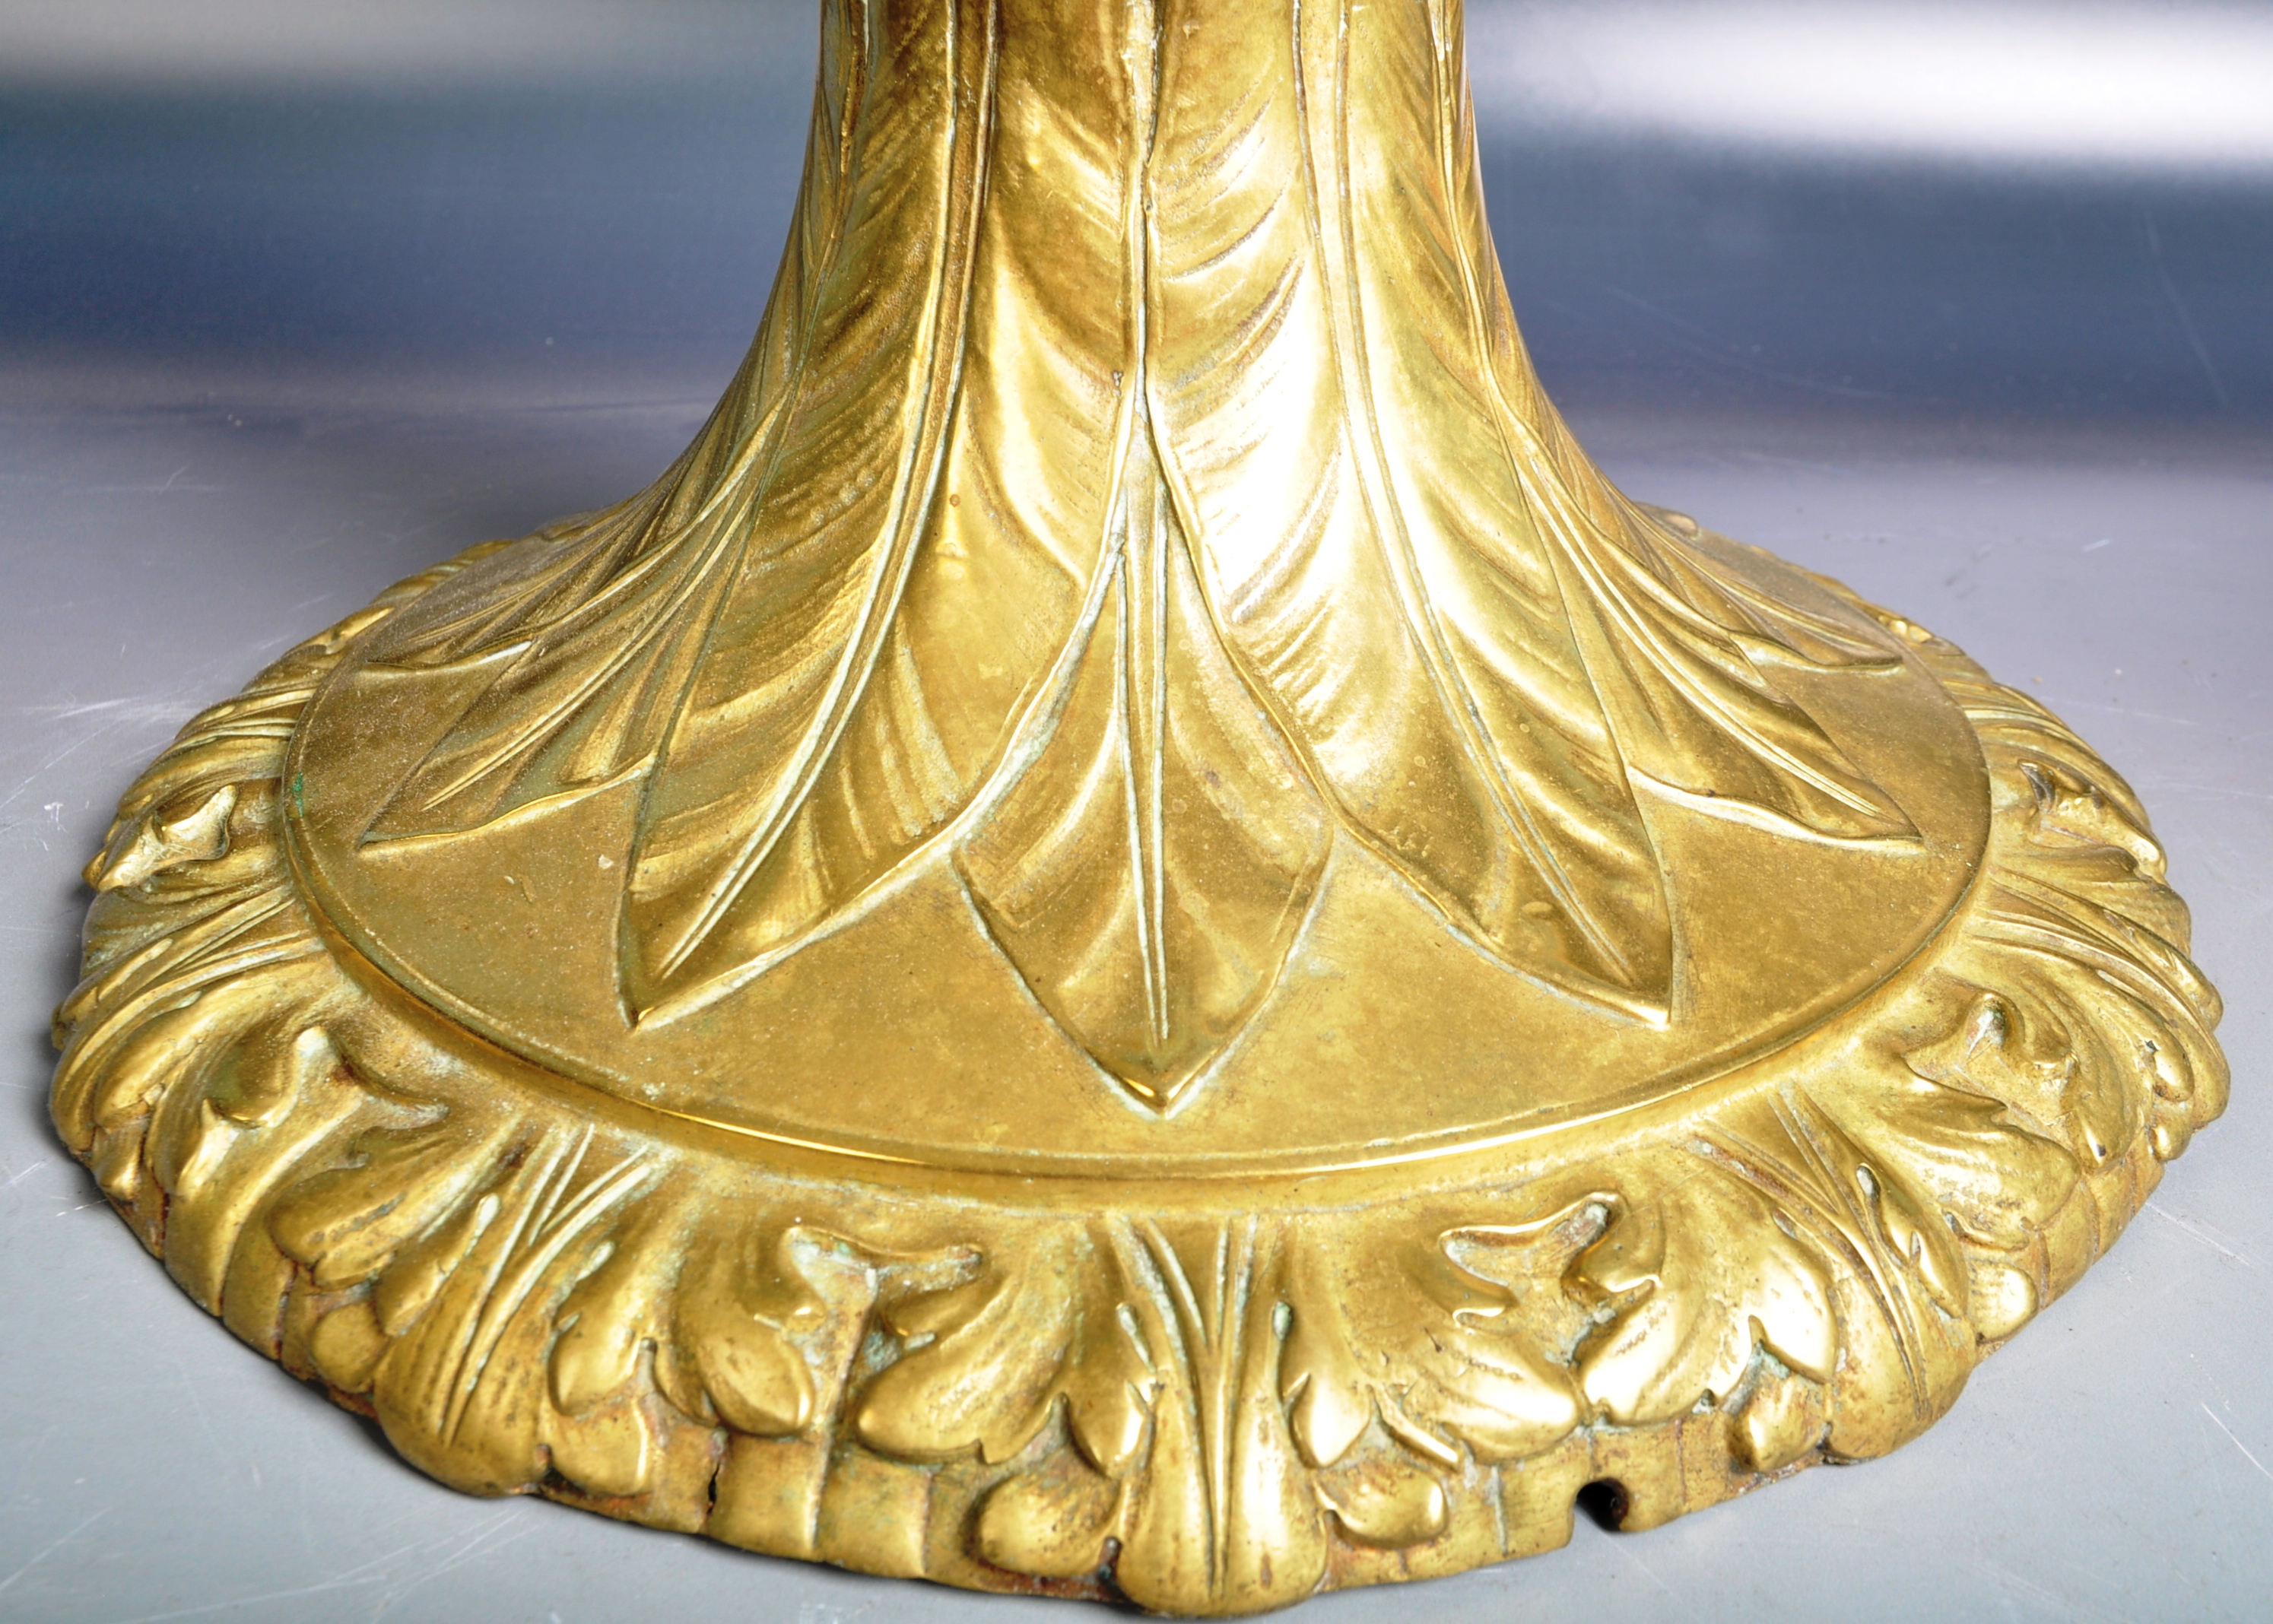 19TH CENTURY VICTORIAN ART NOUVEAU OIL LAMP STAND - Image 8 of 10